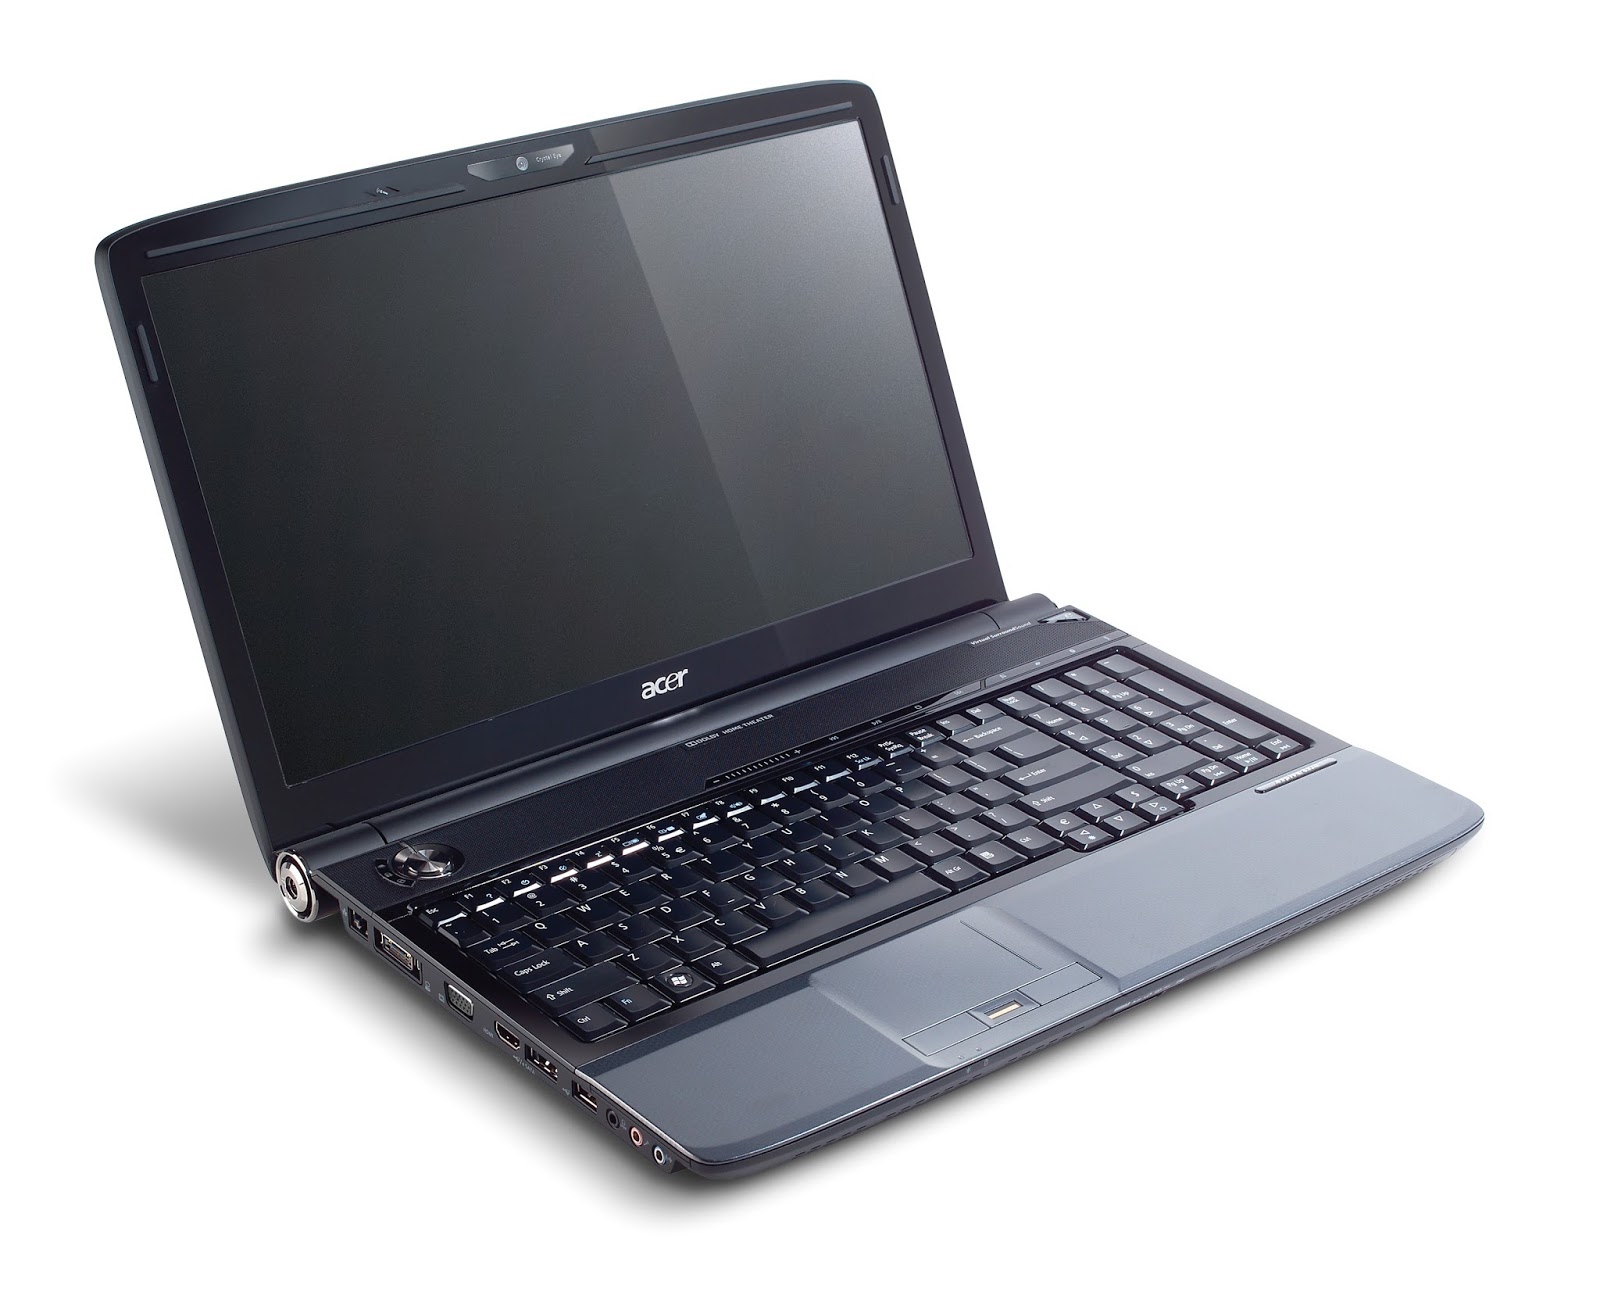 acer aspire zg5 drivers